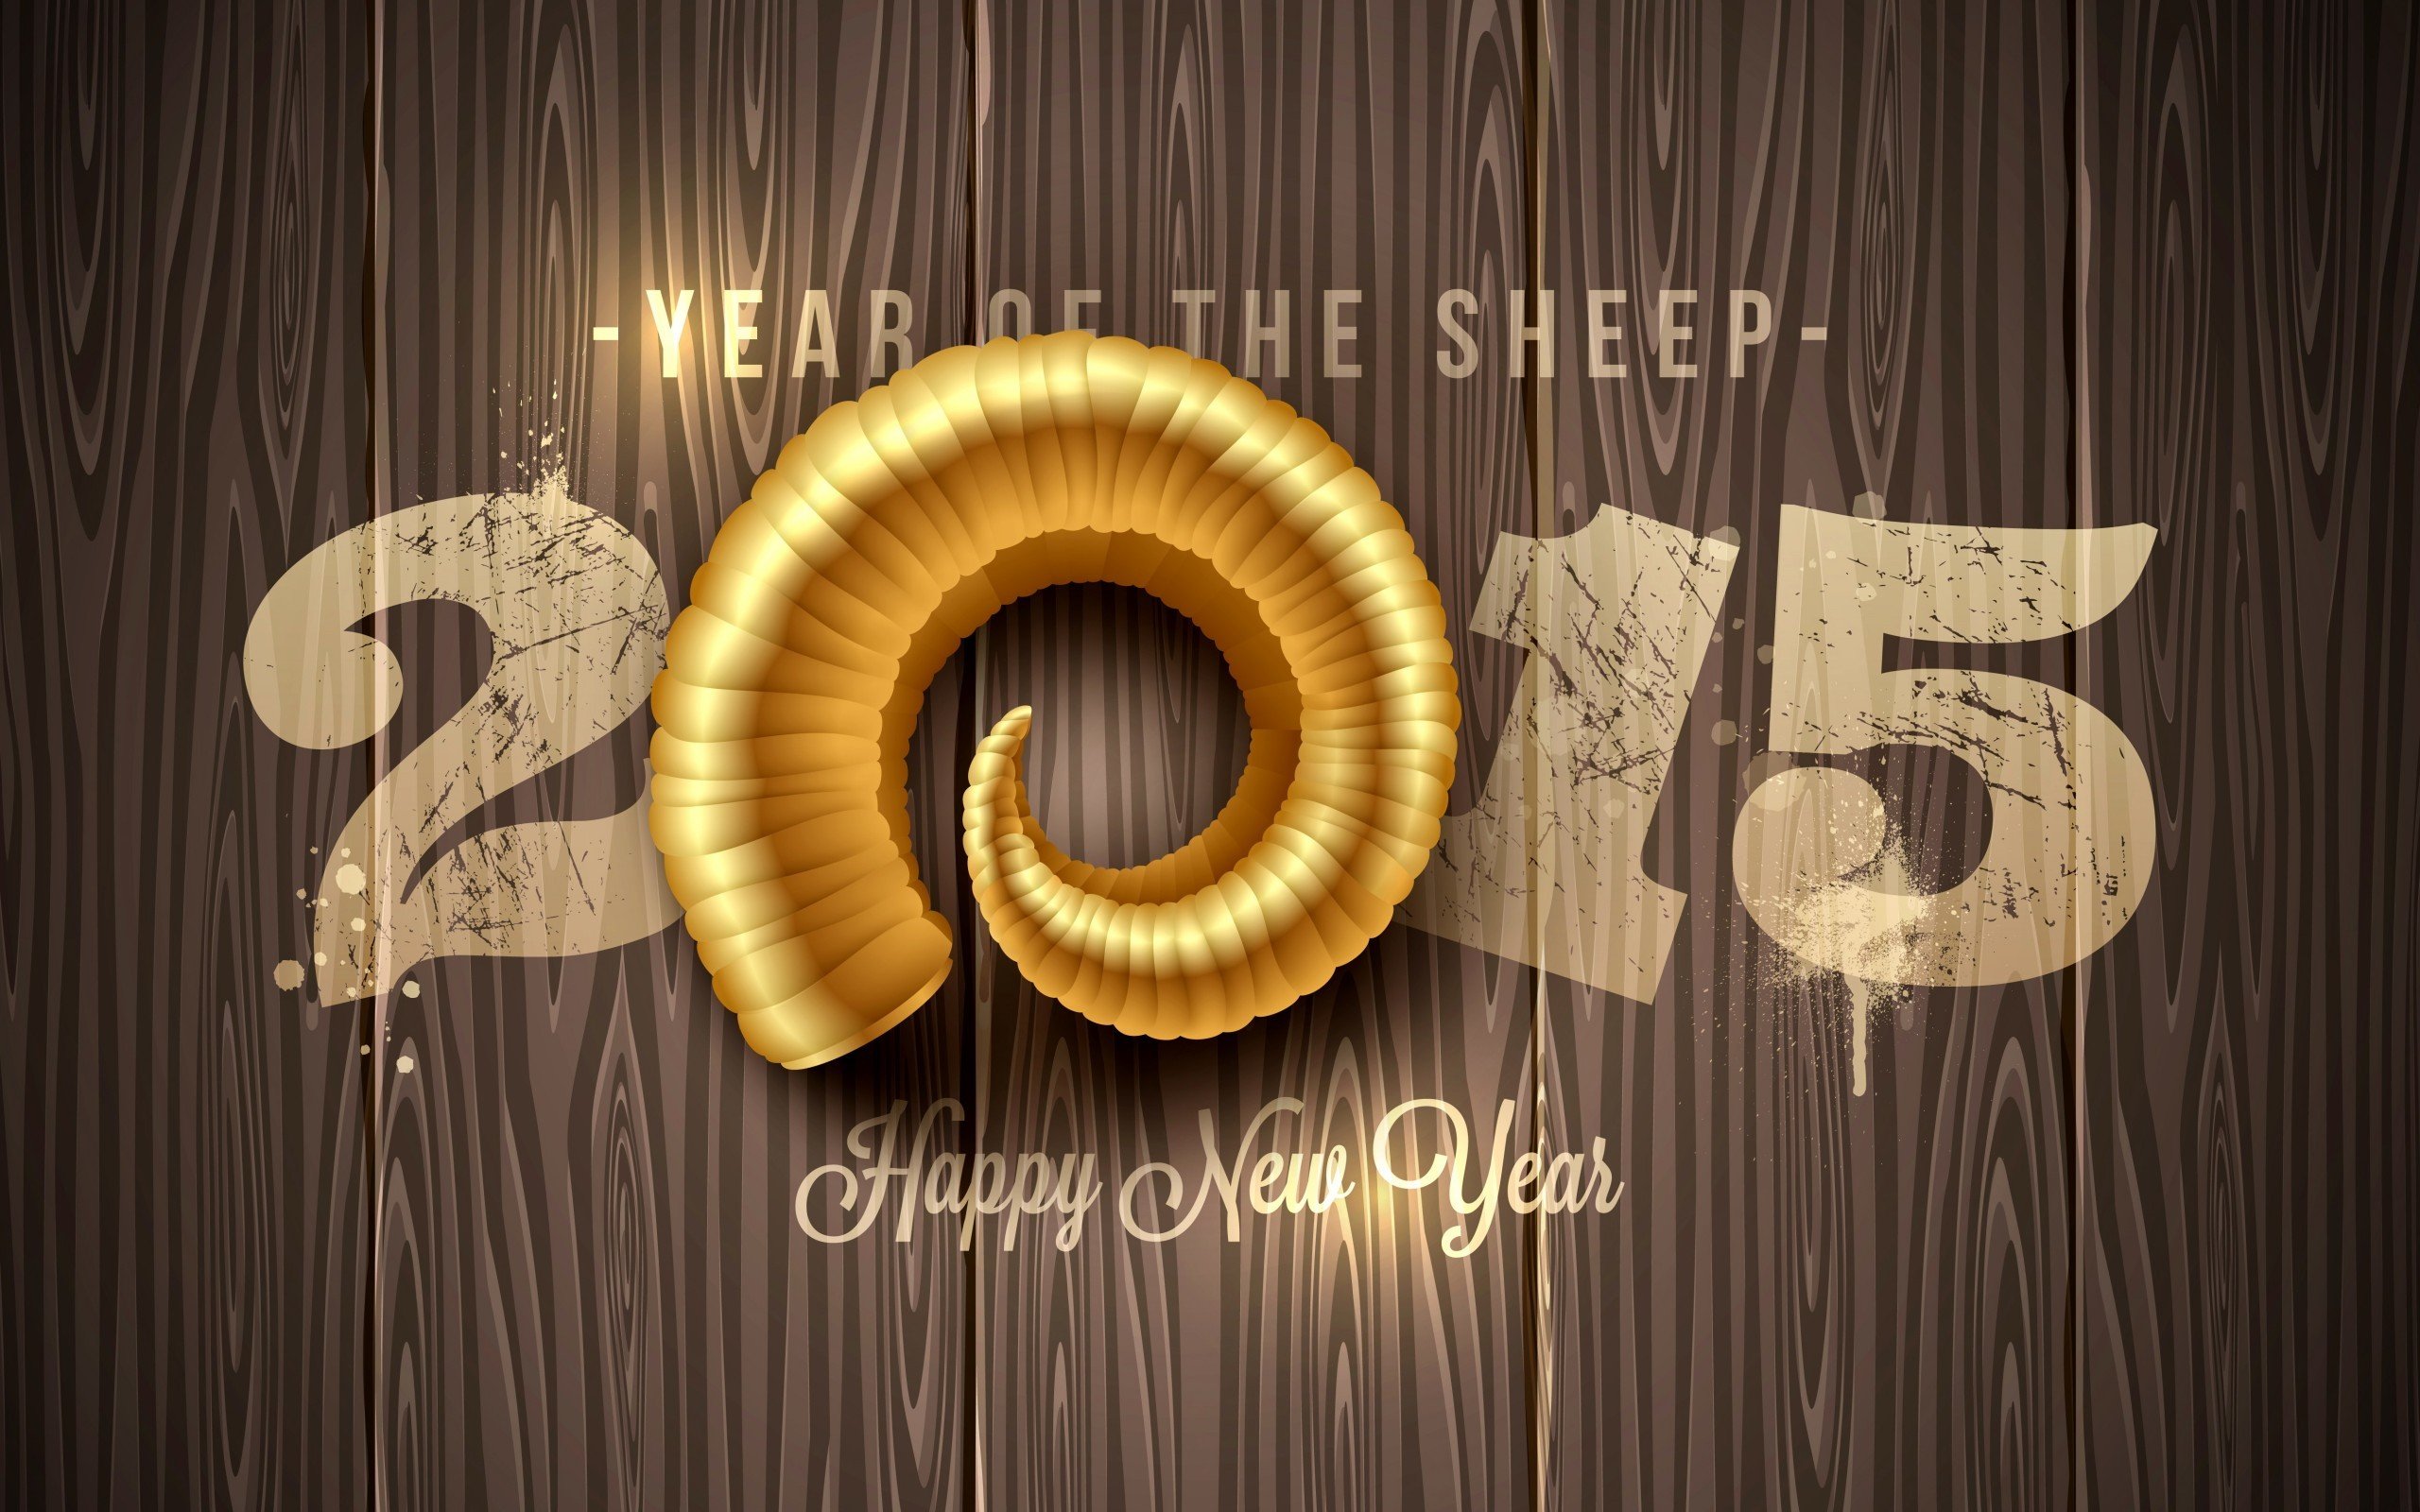 anime, New Year, Sheep, 2015, Horns, Wooden surface Wallpaper